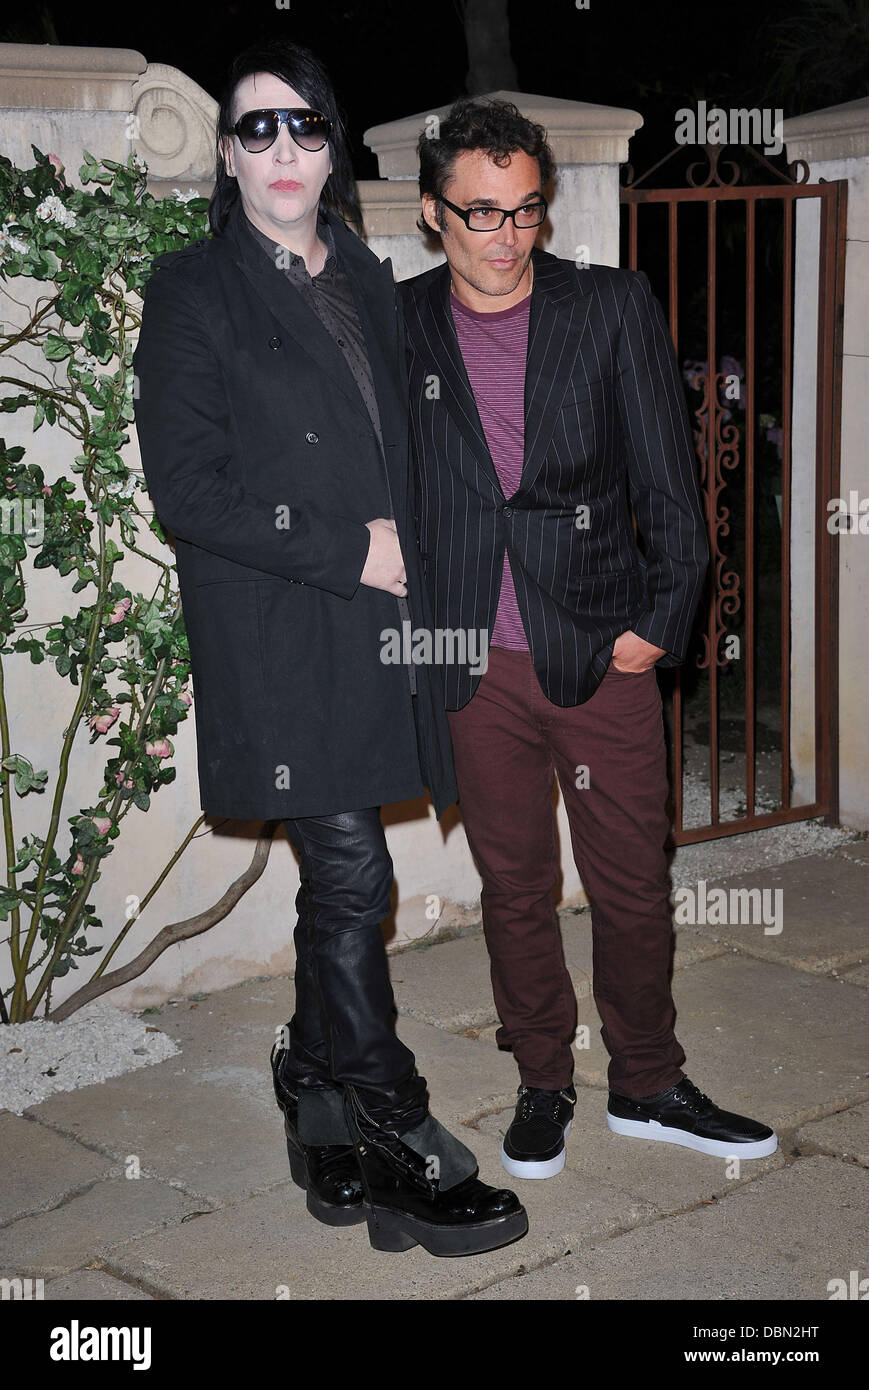 Marilyn Manson and David Lachapelle Miu Miu presents Lucrecia Martel's  'Muta' party held at a private residence Beverly Hills, California -  19.07.11 Stock Photo - Alamy